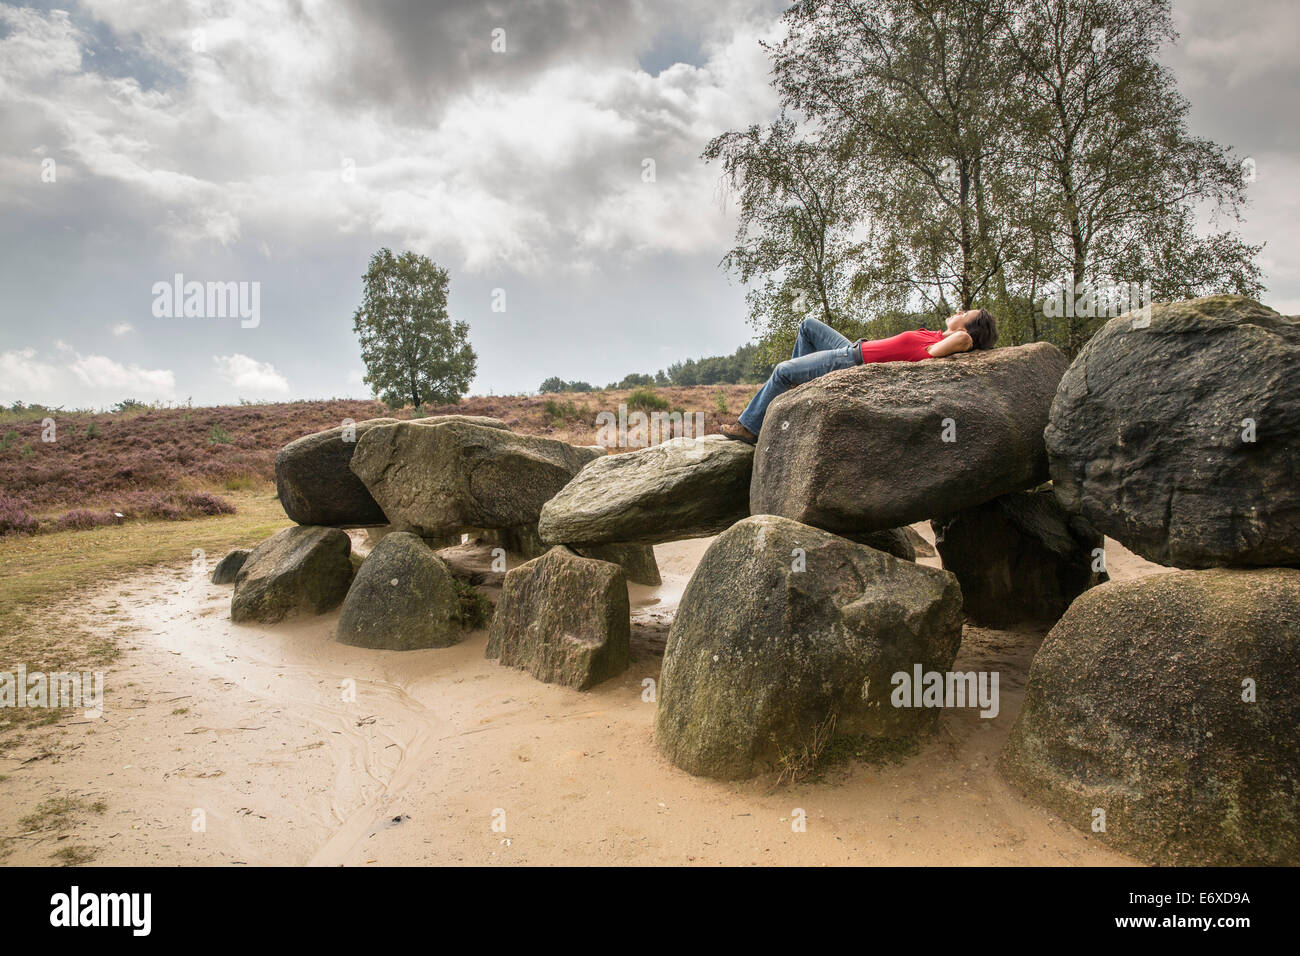 Netherlands, Havelte, Heathland  Holtingerveld Heide. Megalithic tomb called Hunebed. Number Havelterberg 54. Woman relaxes Stock Photo